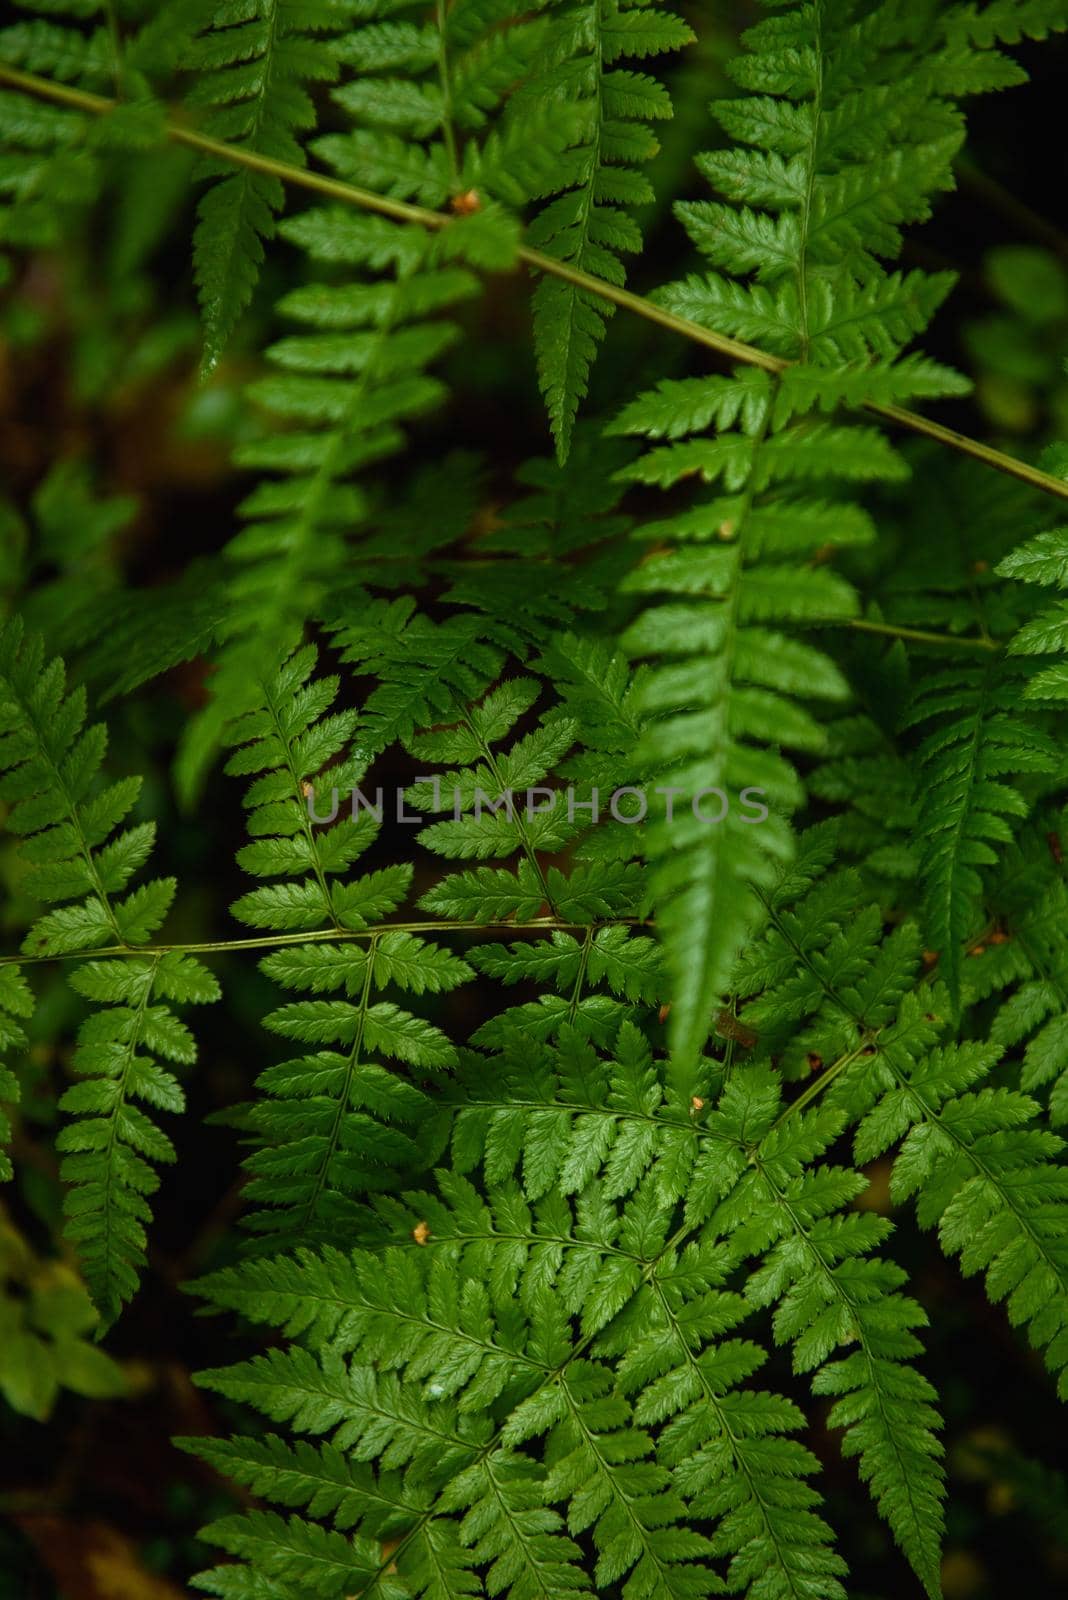 Fern leaves close-up in the taiga forest in the autumn season.